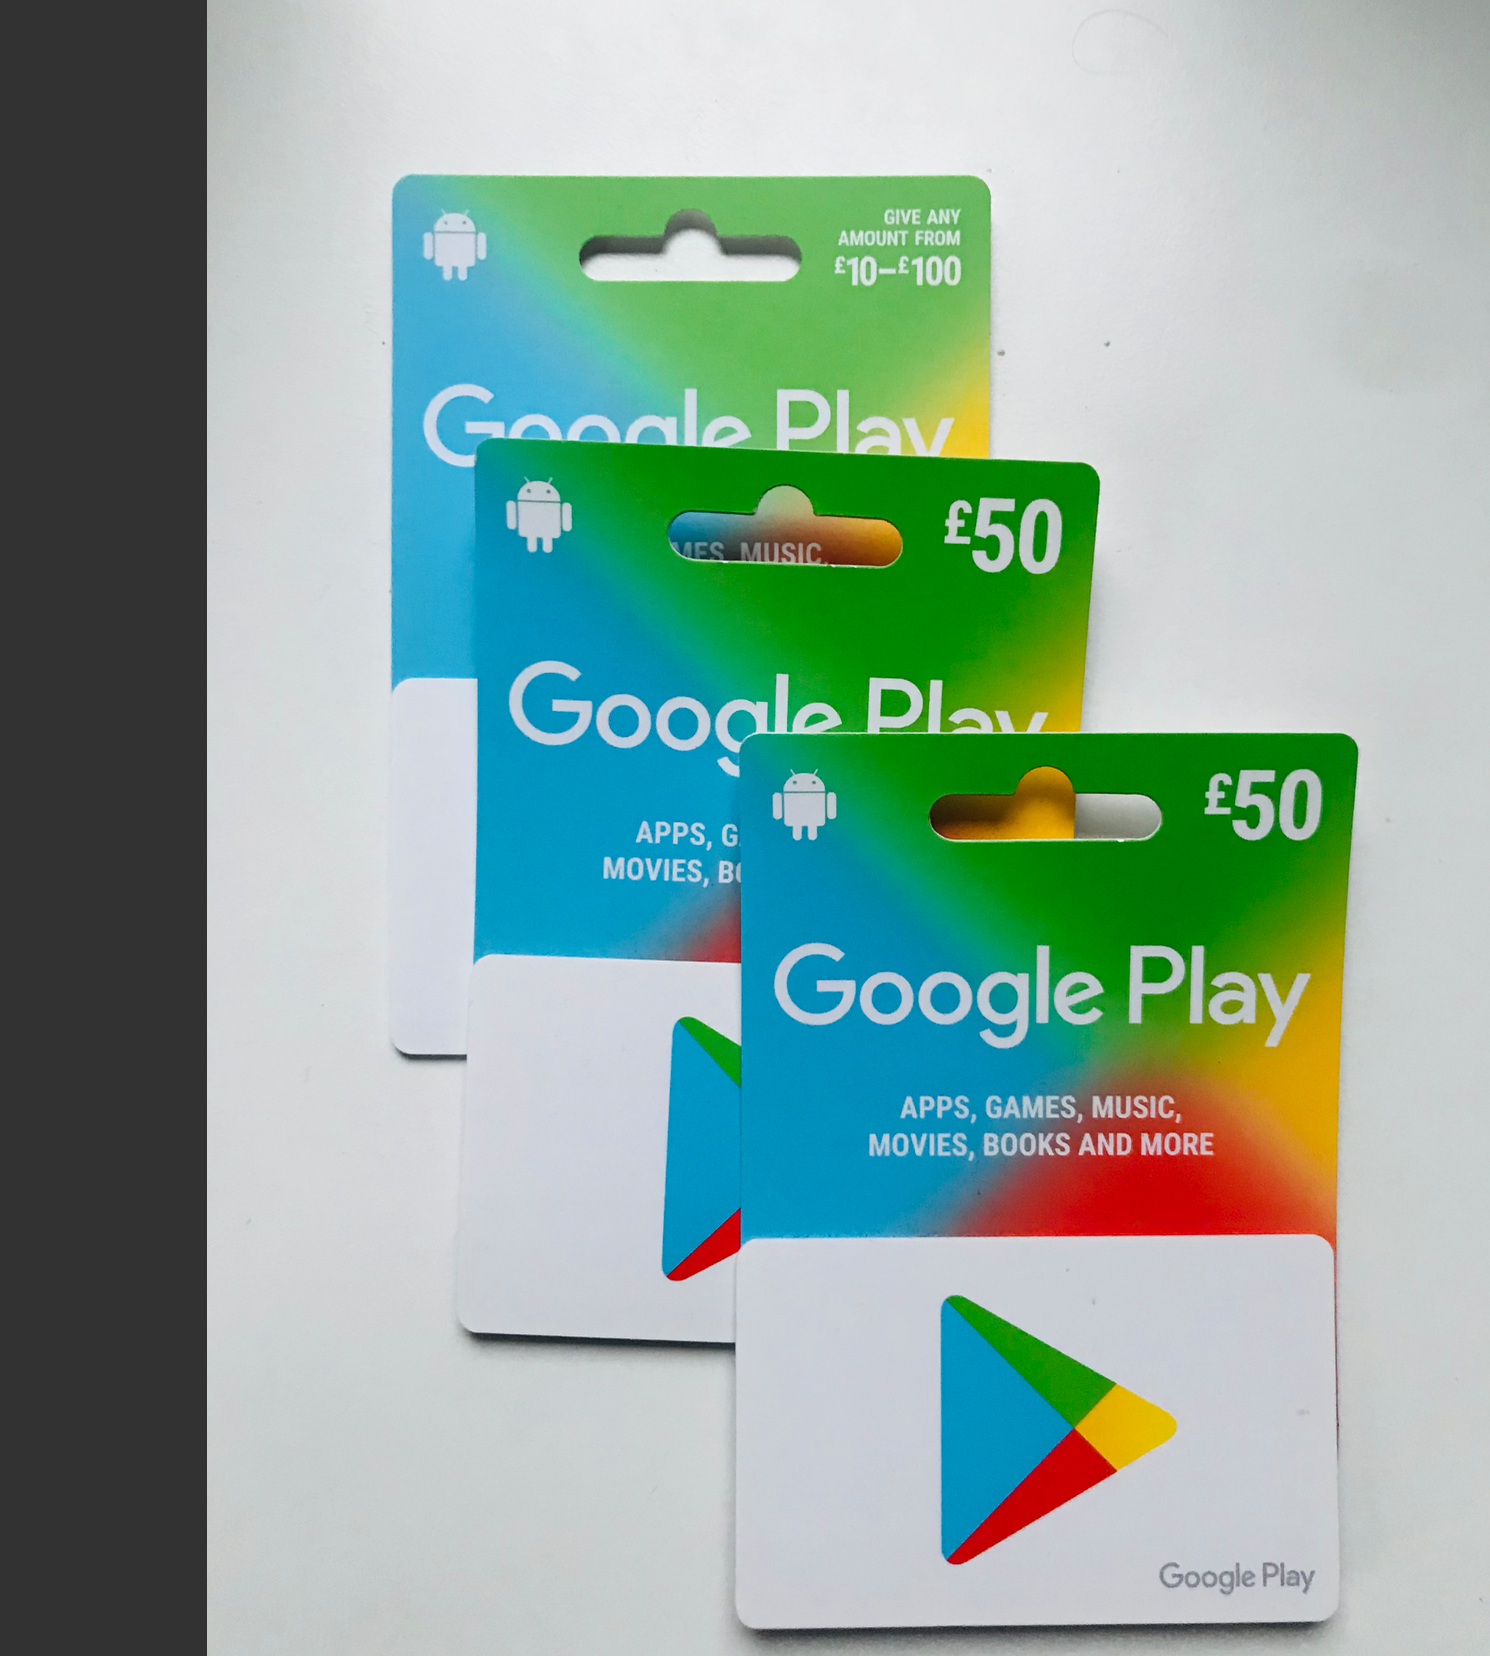 Google play gift card scam? - PayPal Community